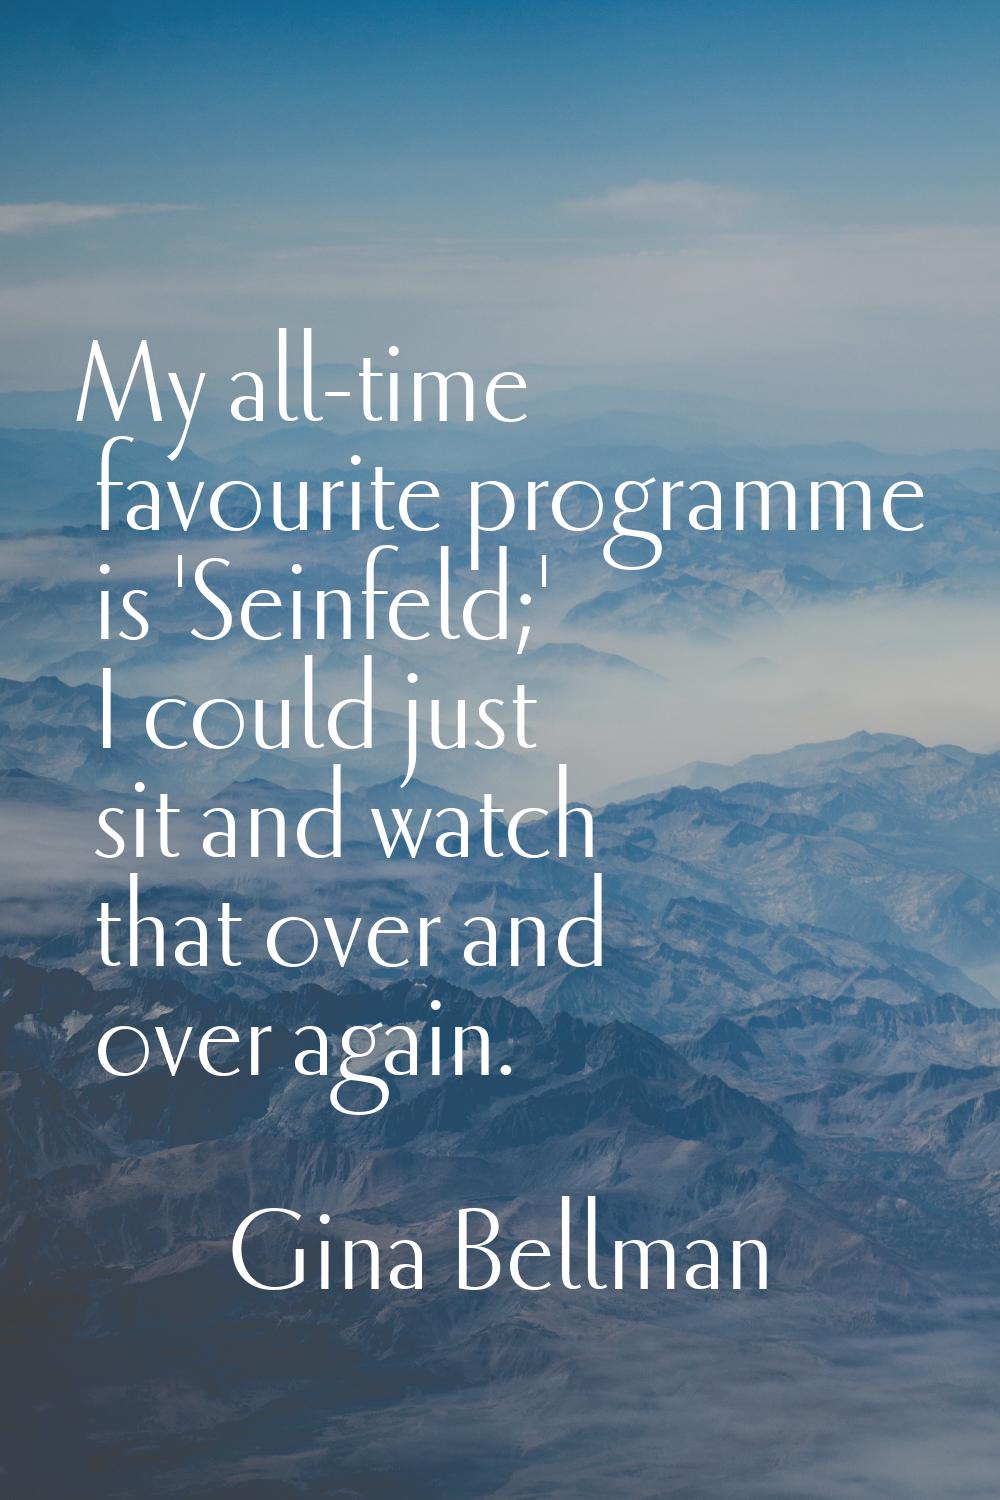 My all-time favourite programme is 'Seinfeld;' I could just sit and watch that over and over again.